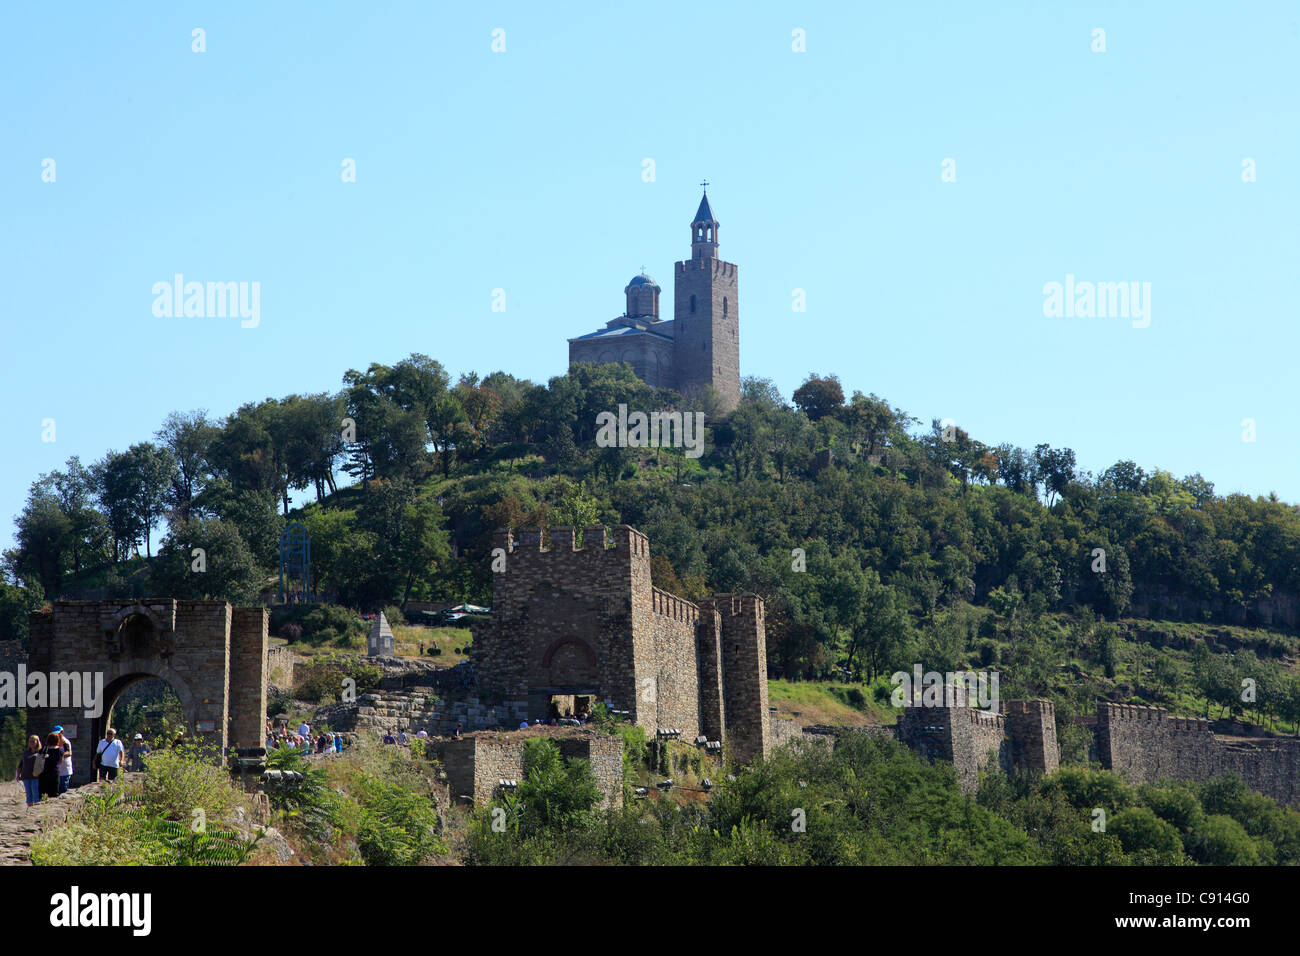 Veliko Tarnovo is the former Bulgarian capital city and the castle of Tsavarets has been reconstructed on the hilltop above the Stock Photo